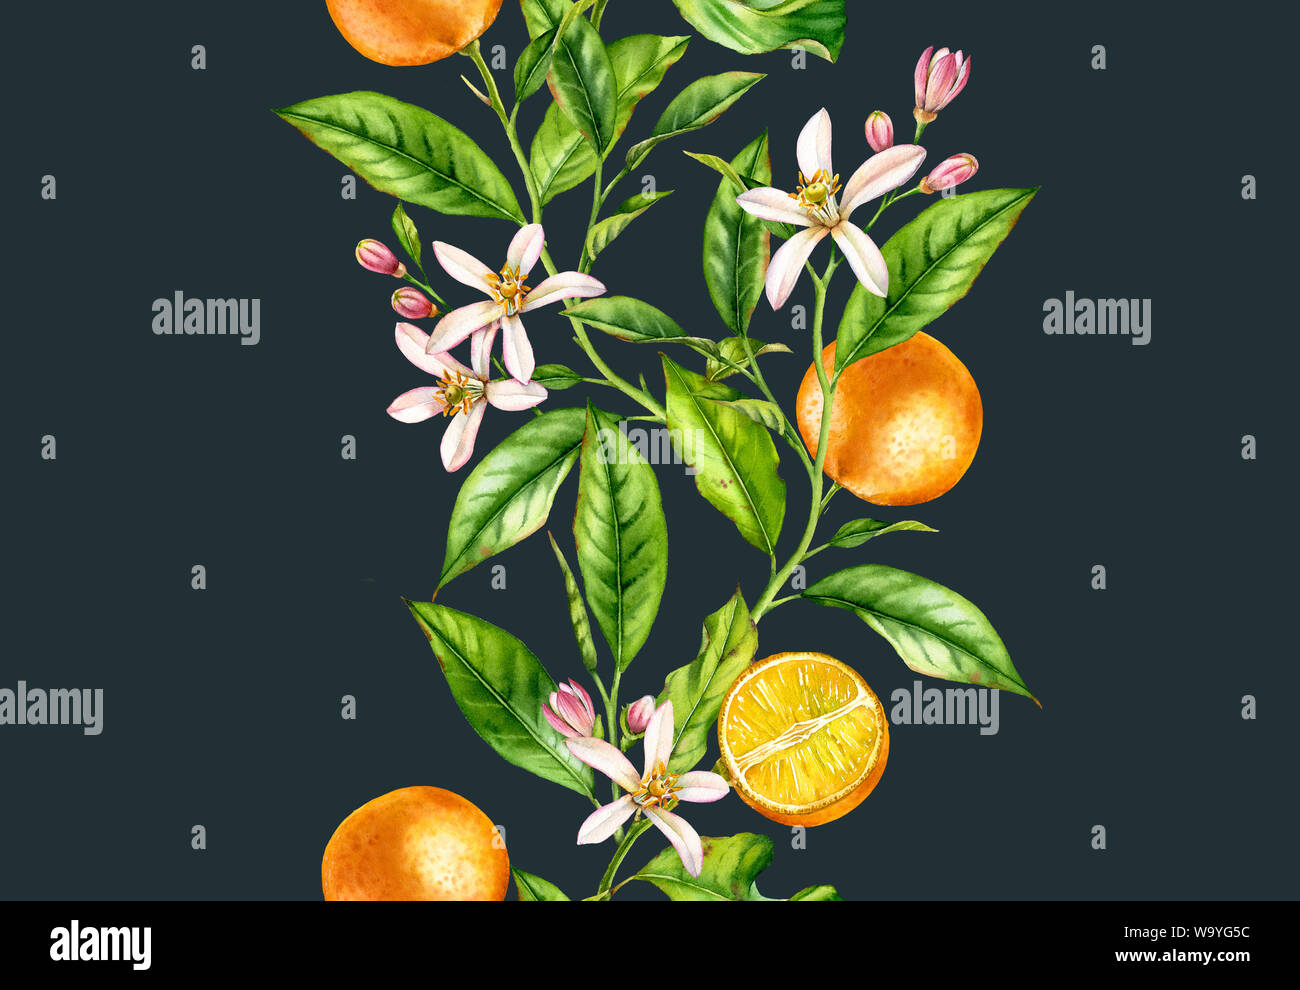 Orange fruit branches. Seamless vertical border with flowers realistic botanical floral illustration on dark blue background hand painted Stock Photo